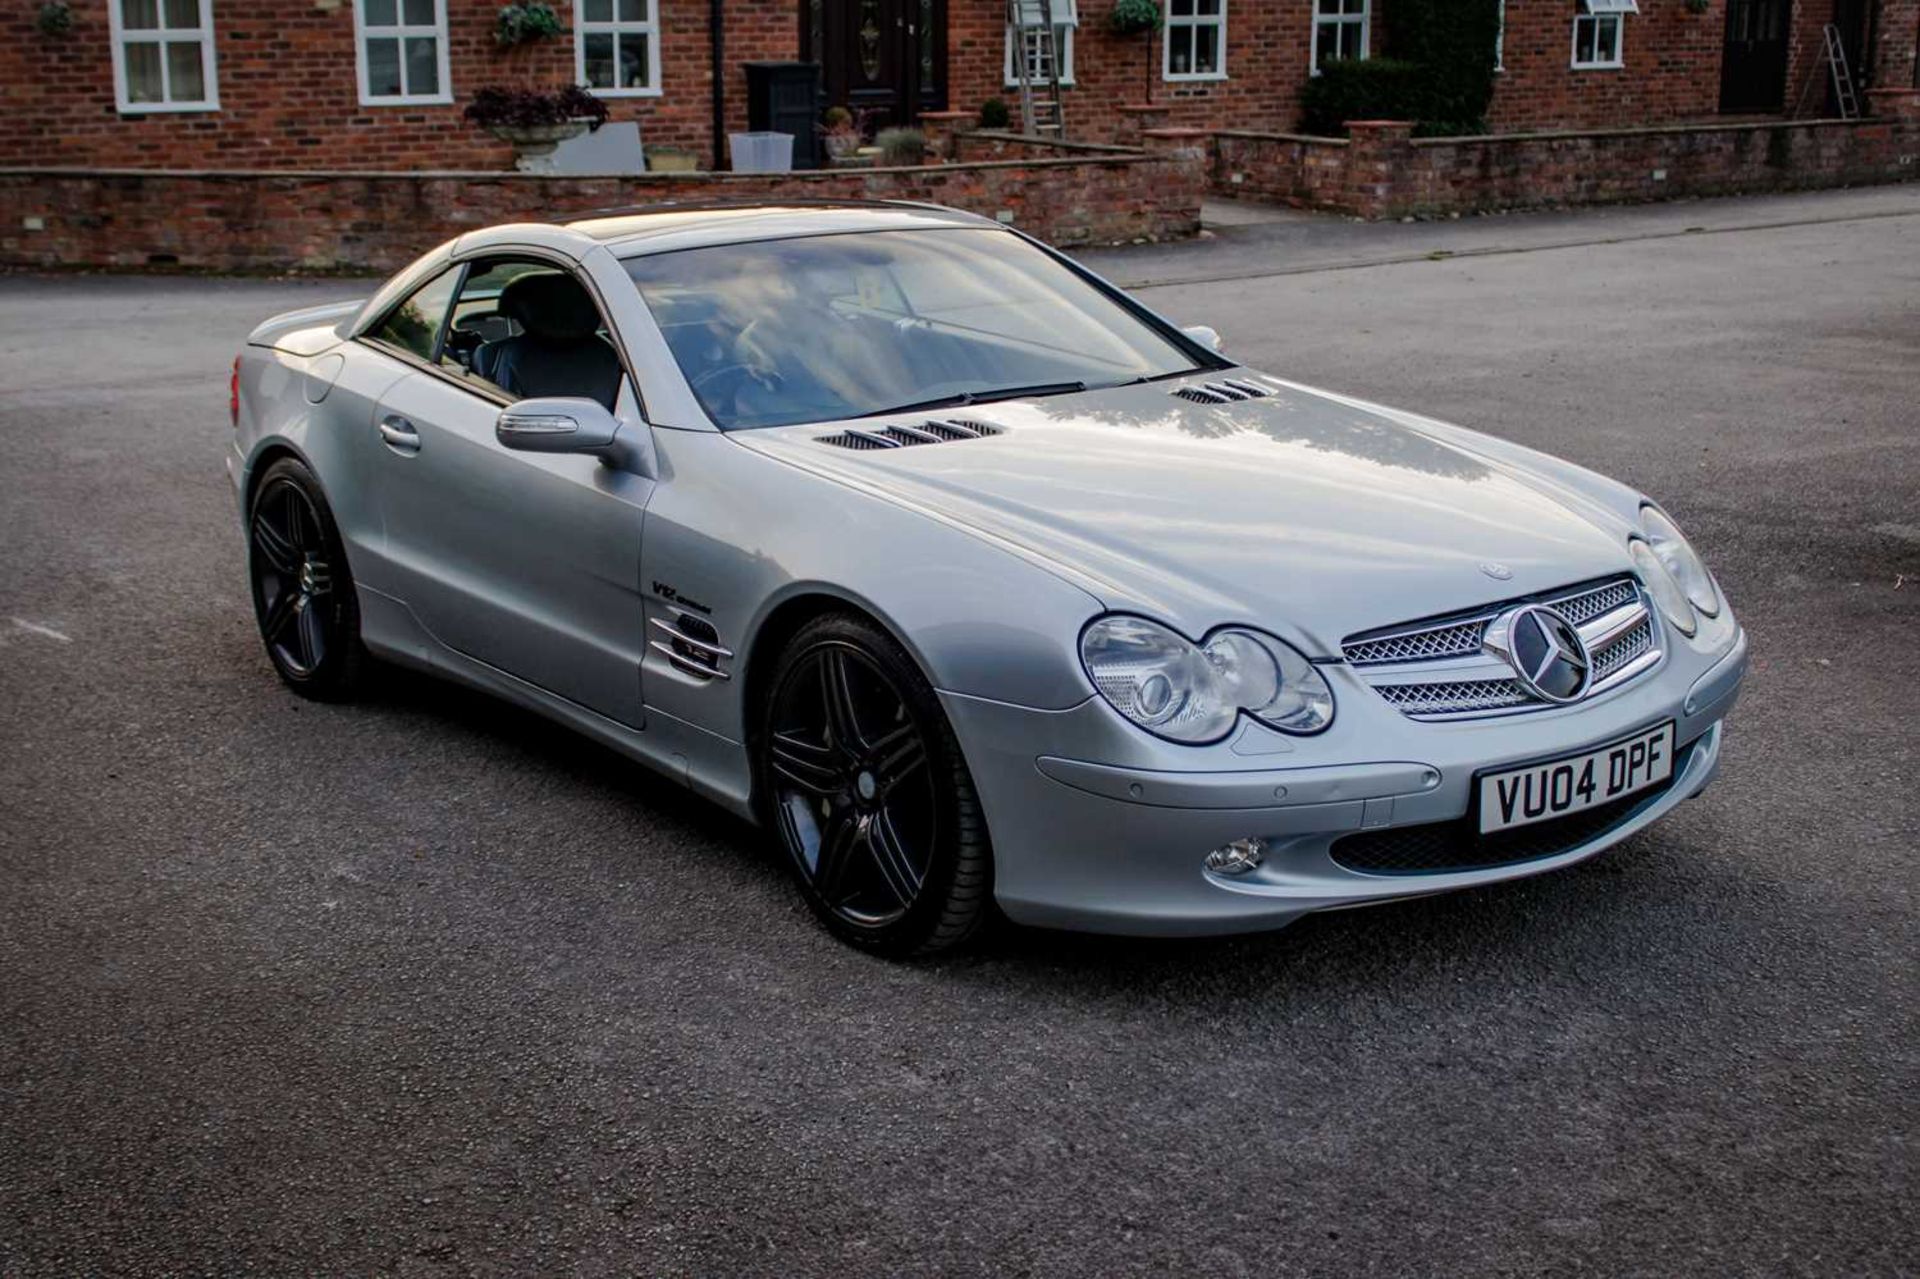 2004 Mercedes SL600 Flagship, 493bhp twin-turbo powered model  - Image 2 of 42